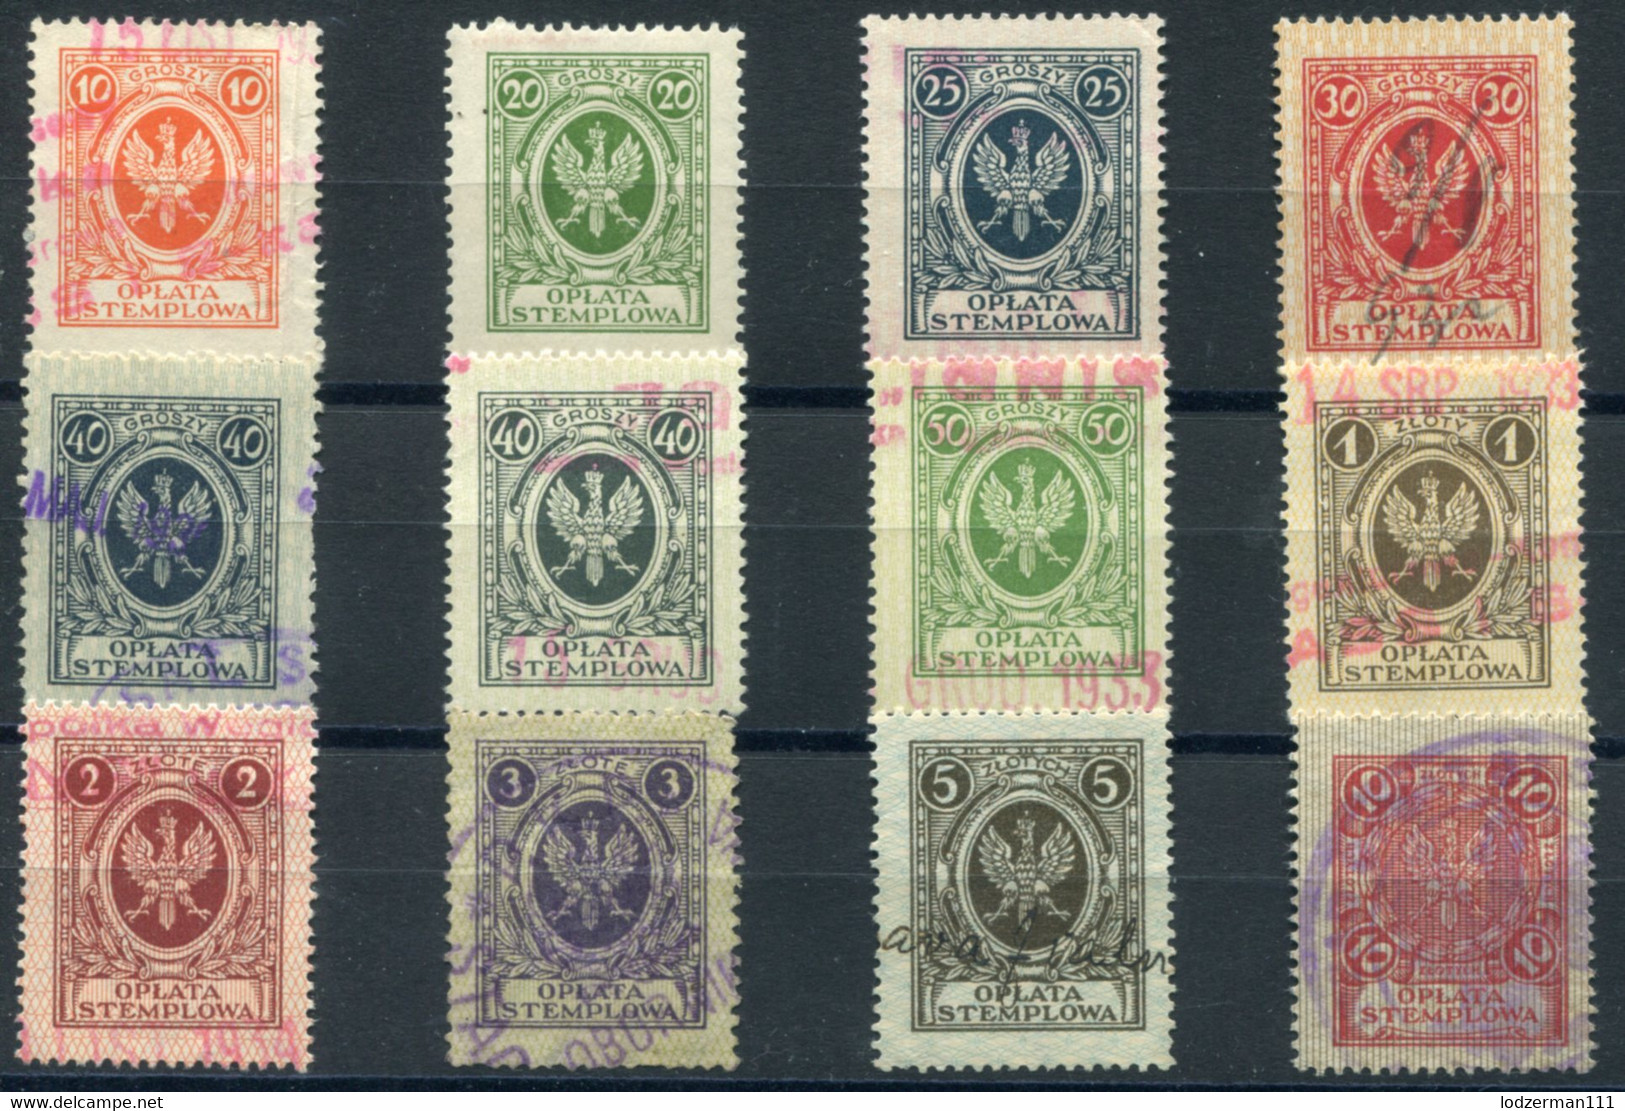 1927 General Zloty Issue #85-96 Compl. Set Used (1 MNH) All VF - Fiscali